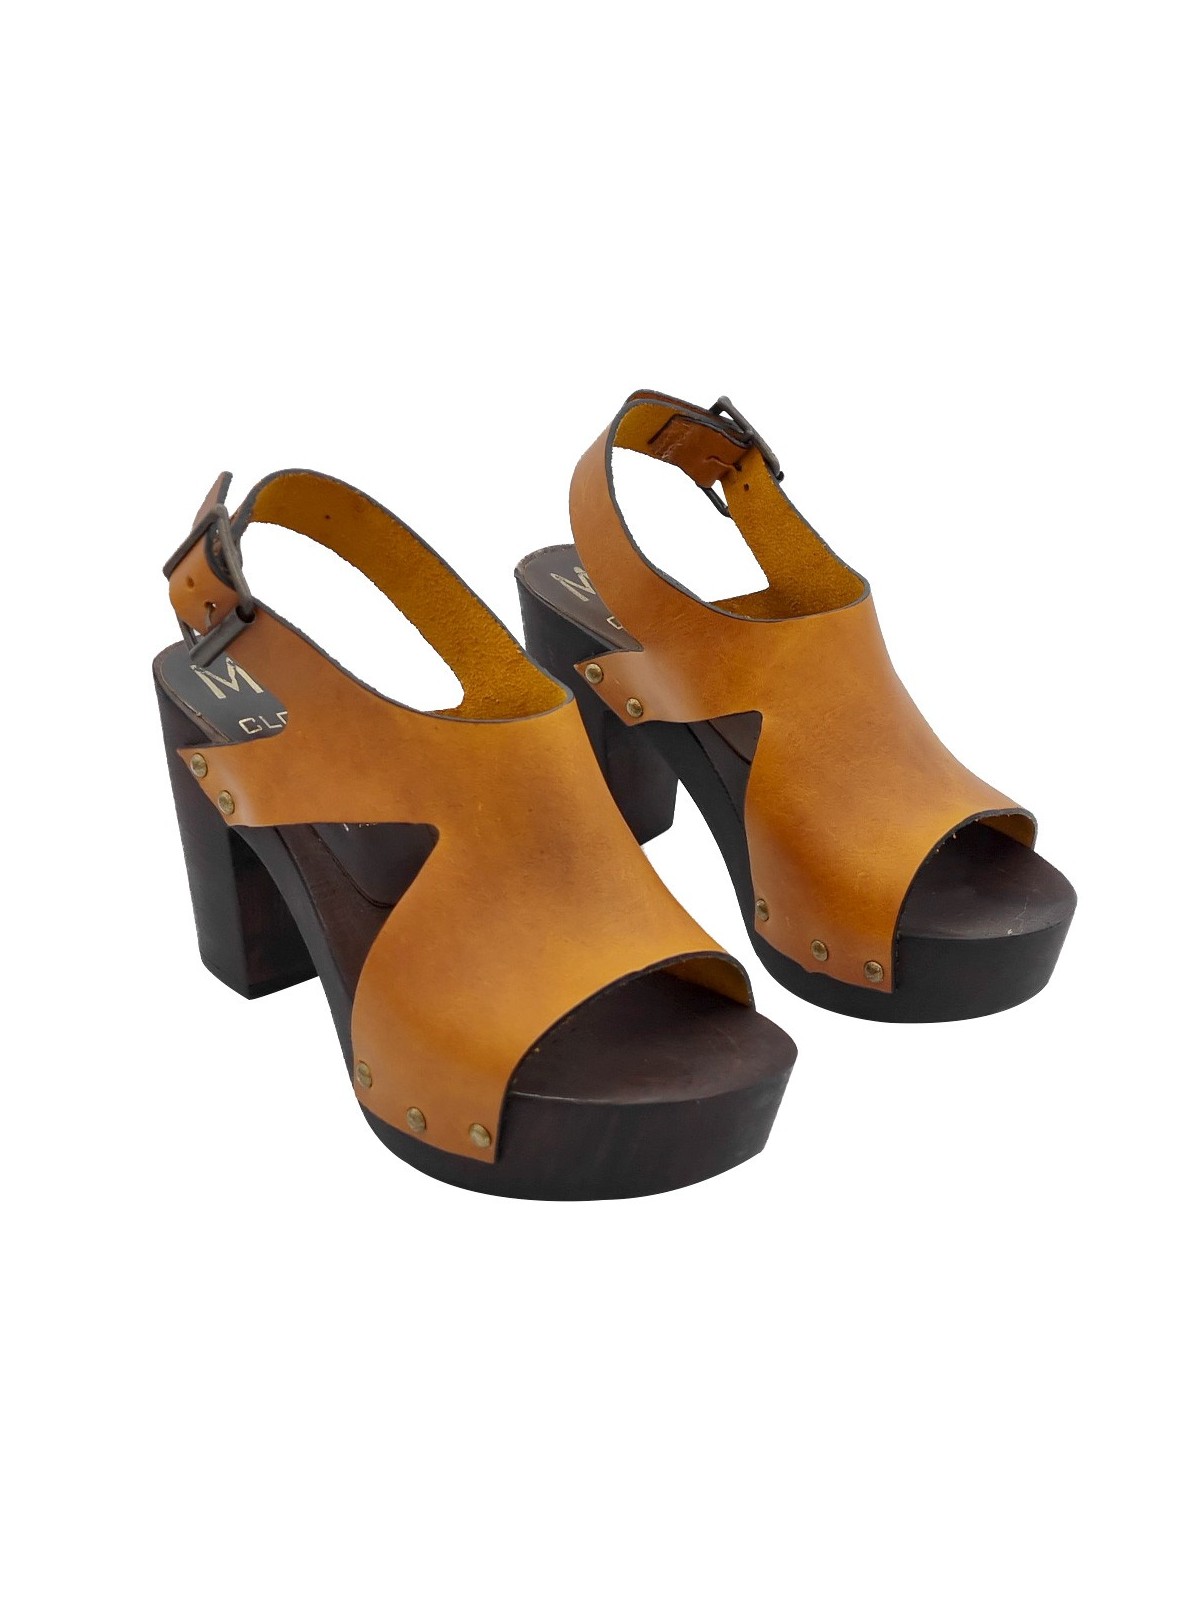 OCHER LEATHER SANDALS WITH STRAP AND HEEL 9